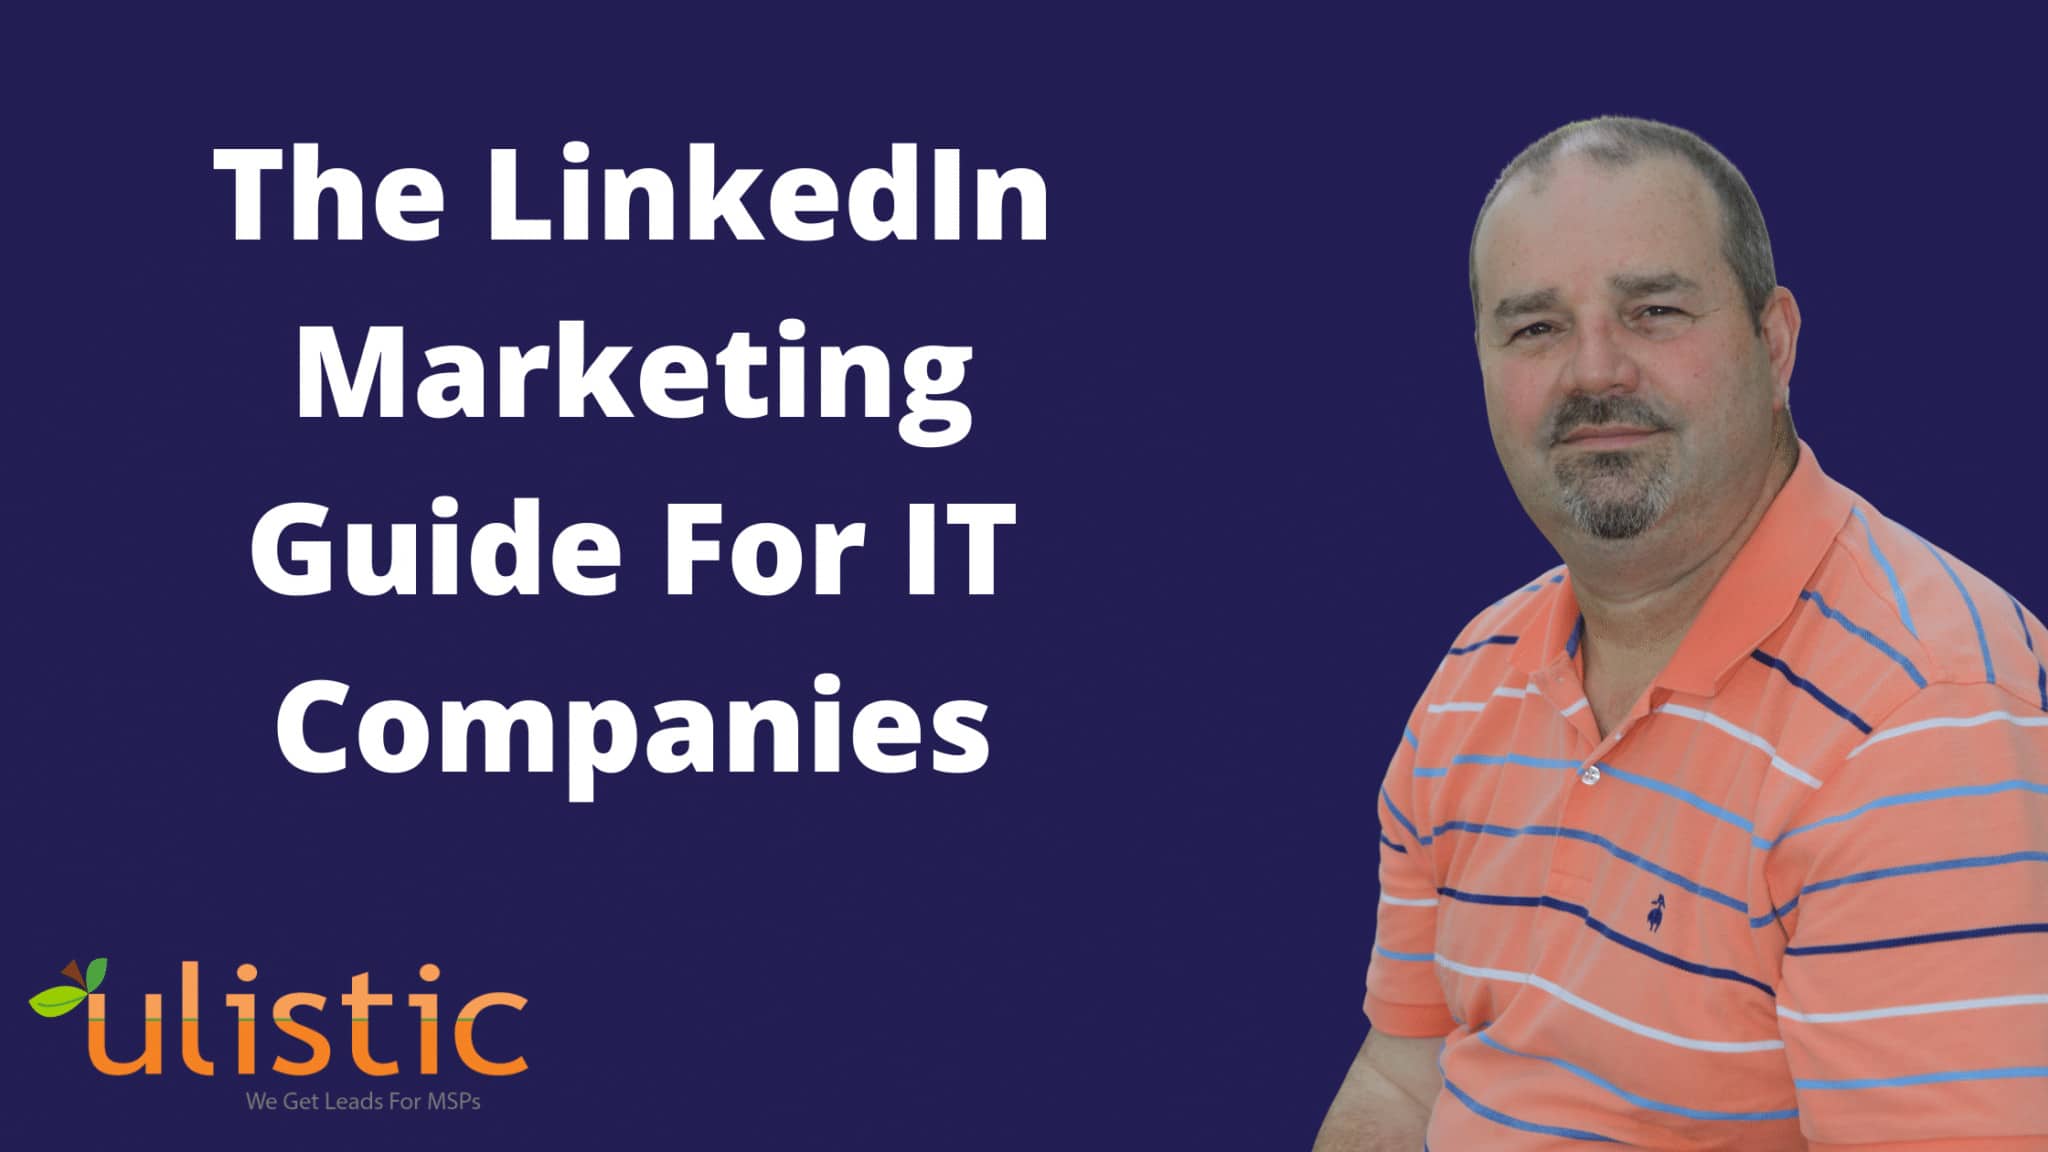 The LinkedIn Marketing Guide For IT Companies